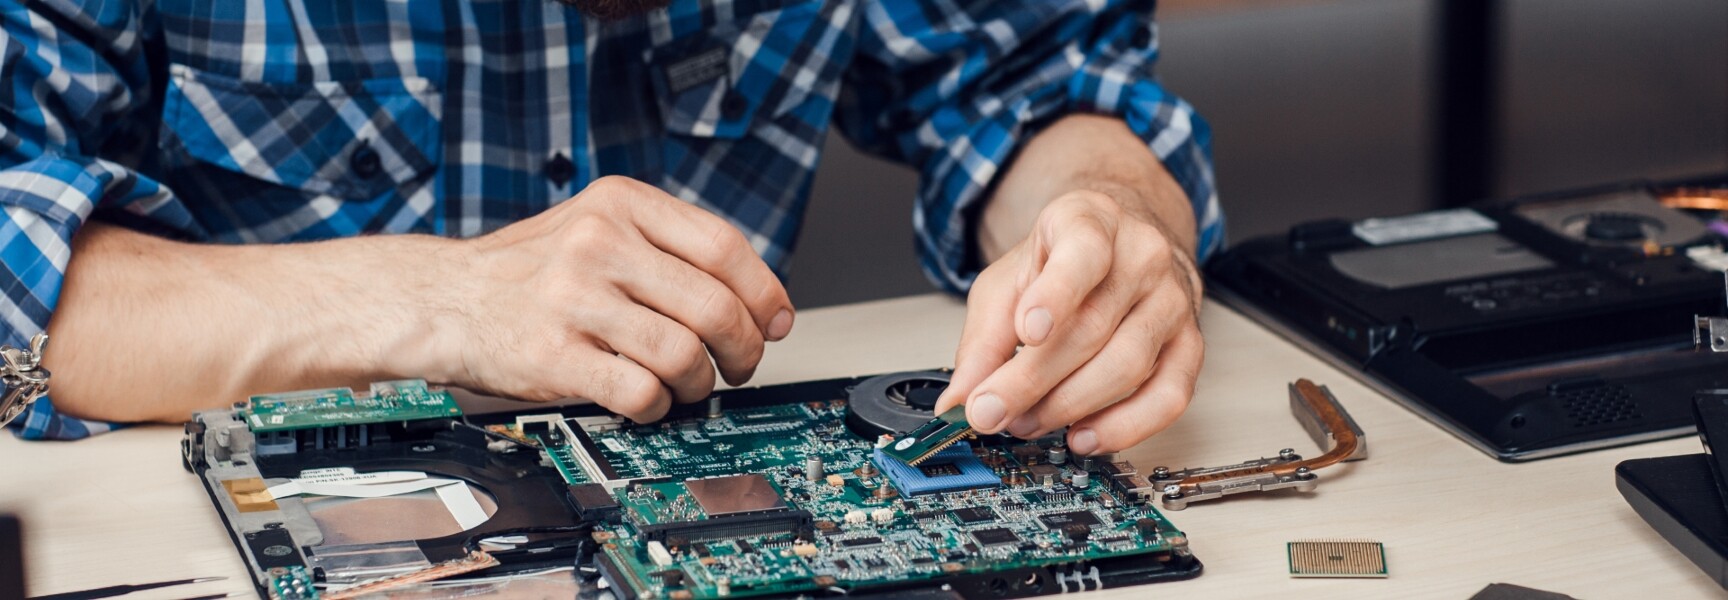 A person repairing a laptop with the circuit board exposed.